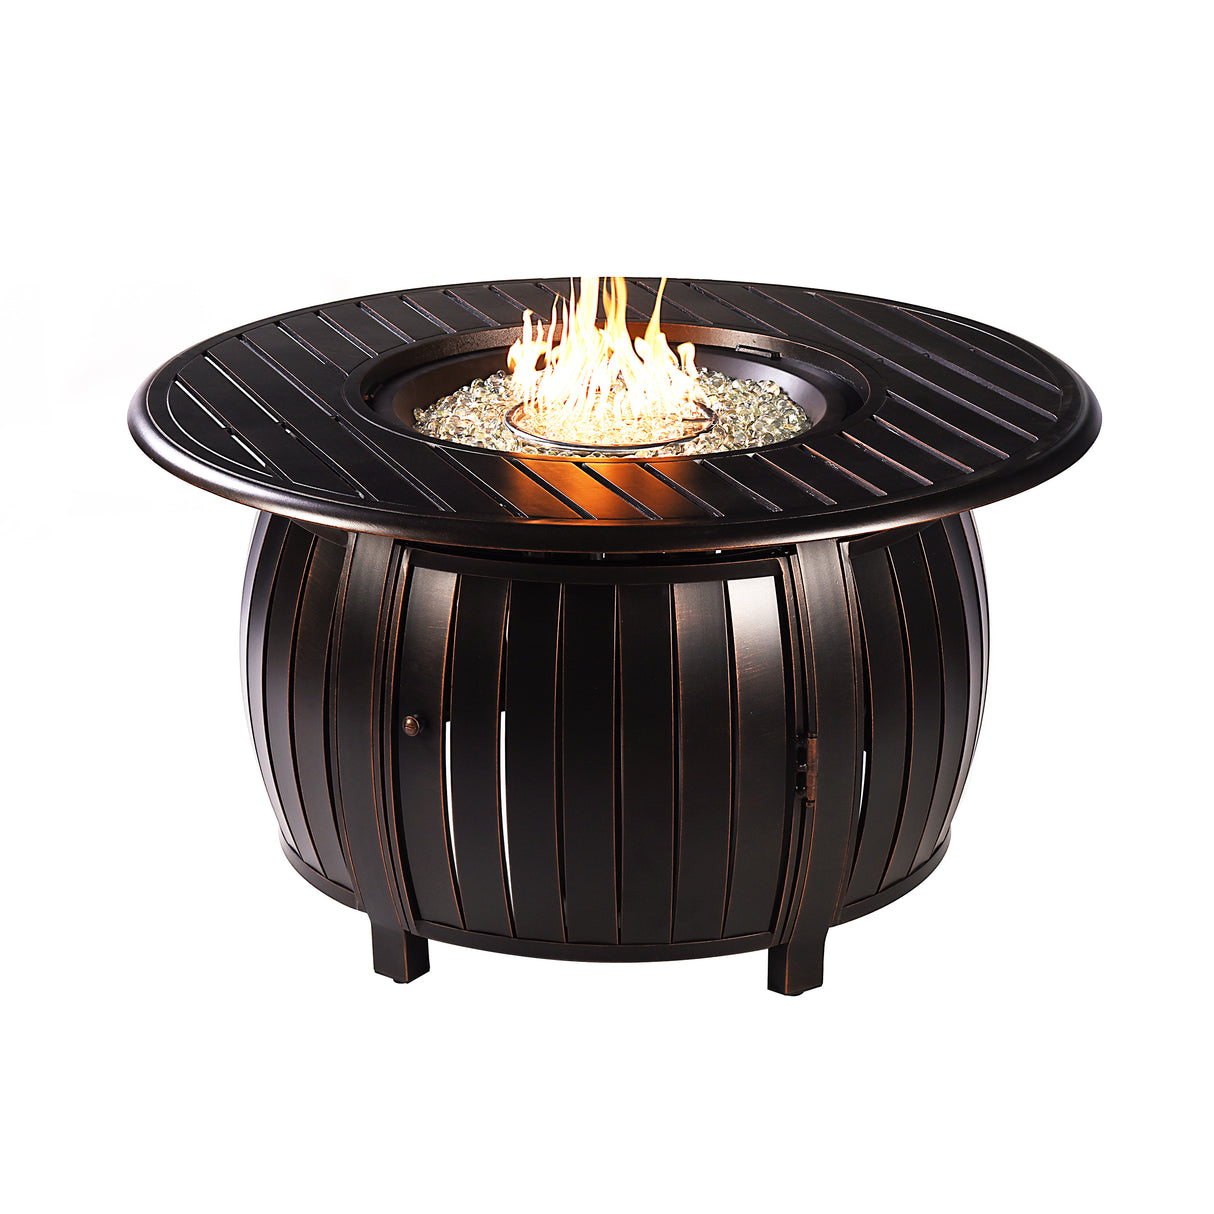 Black Aluminum Fire Table Set with Four Deep Seating Loveseats